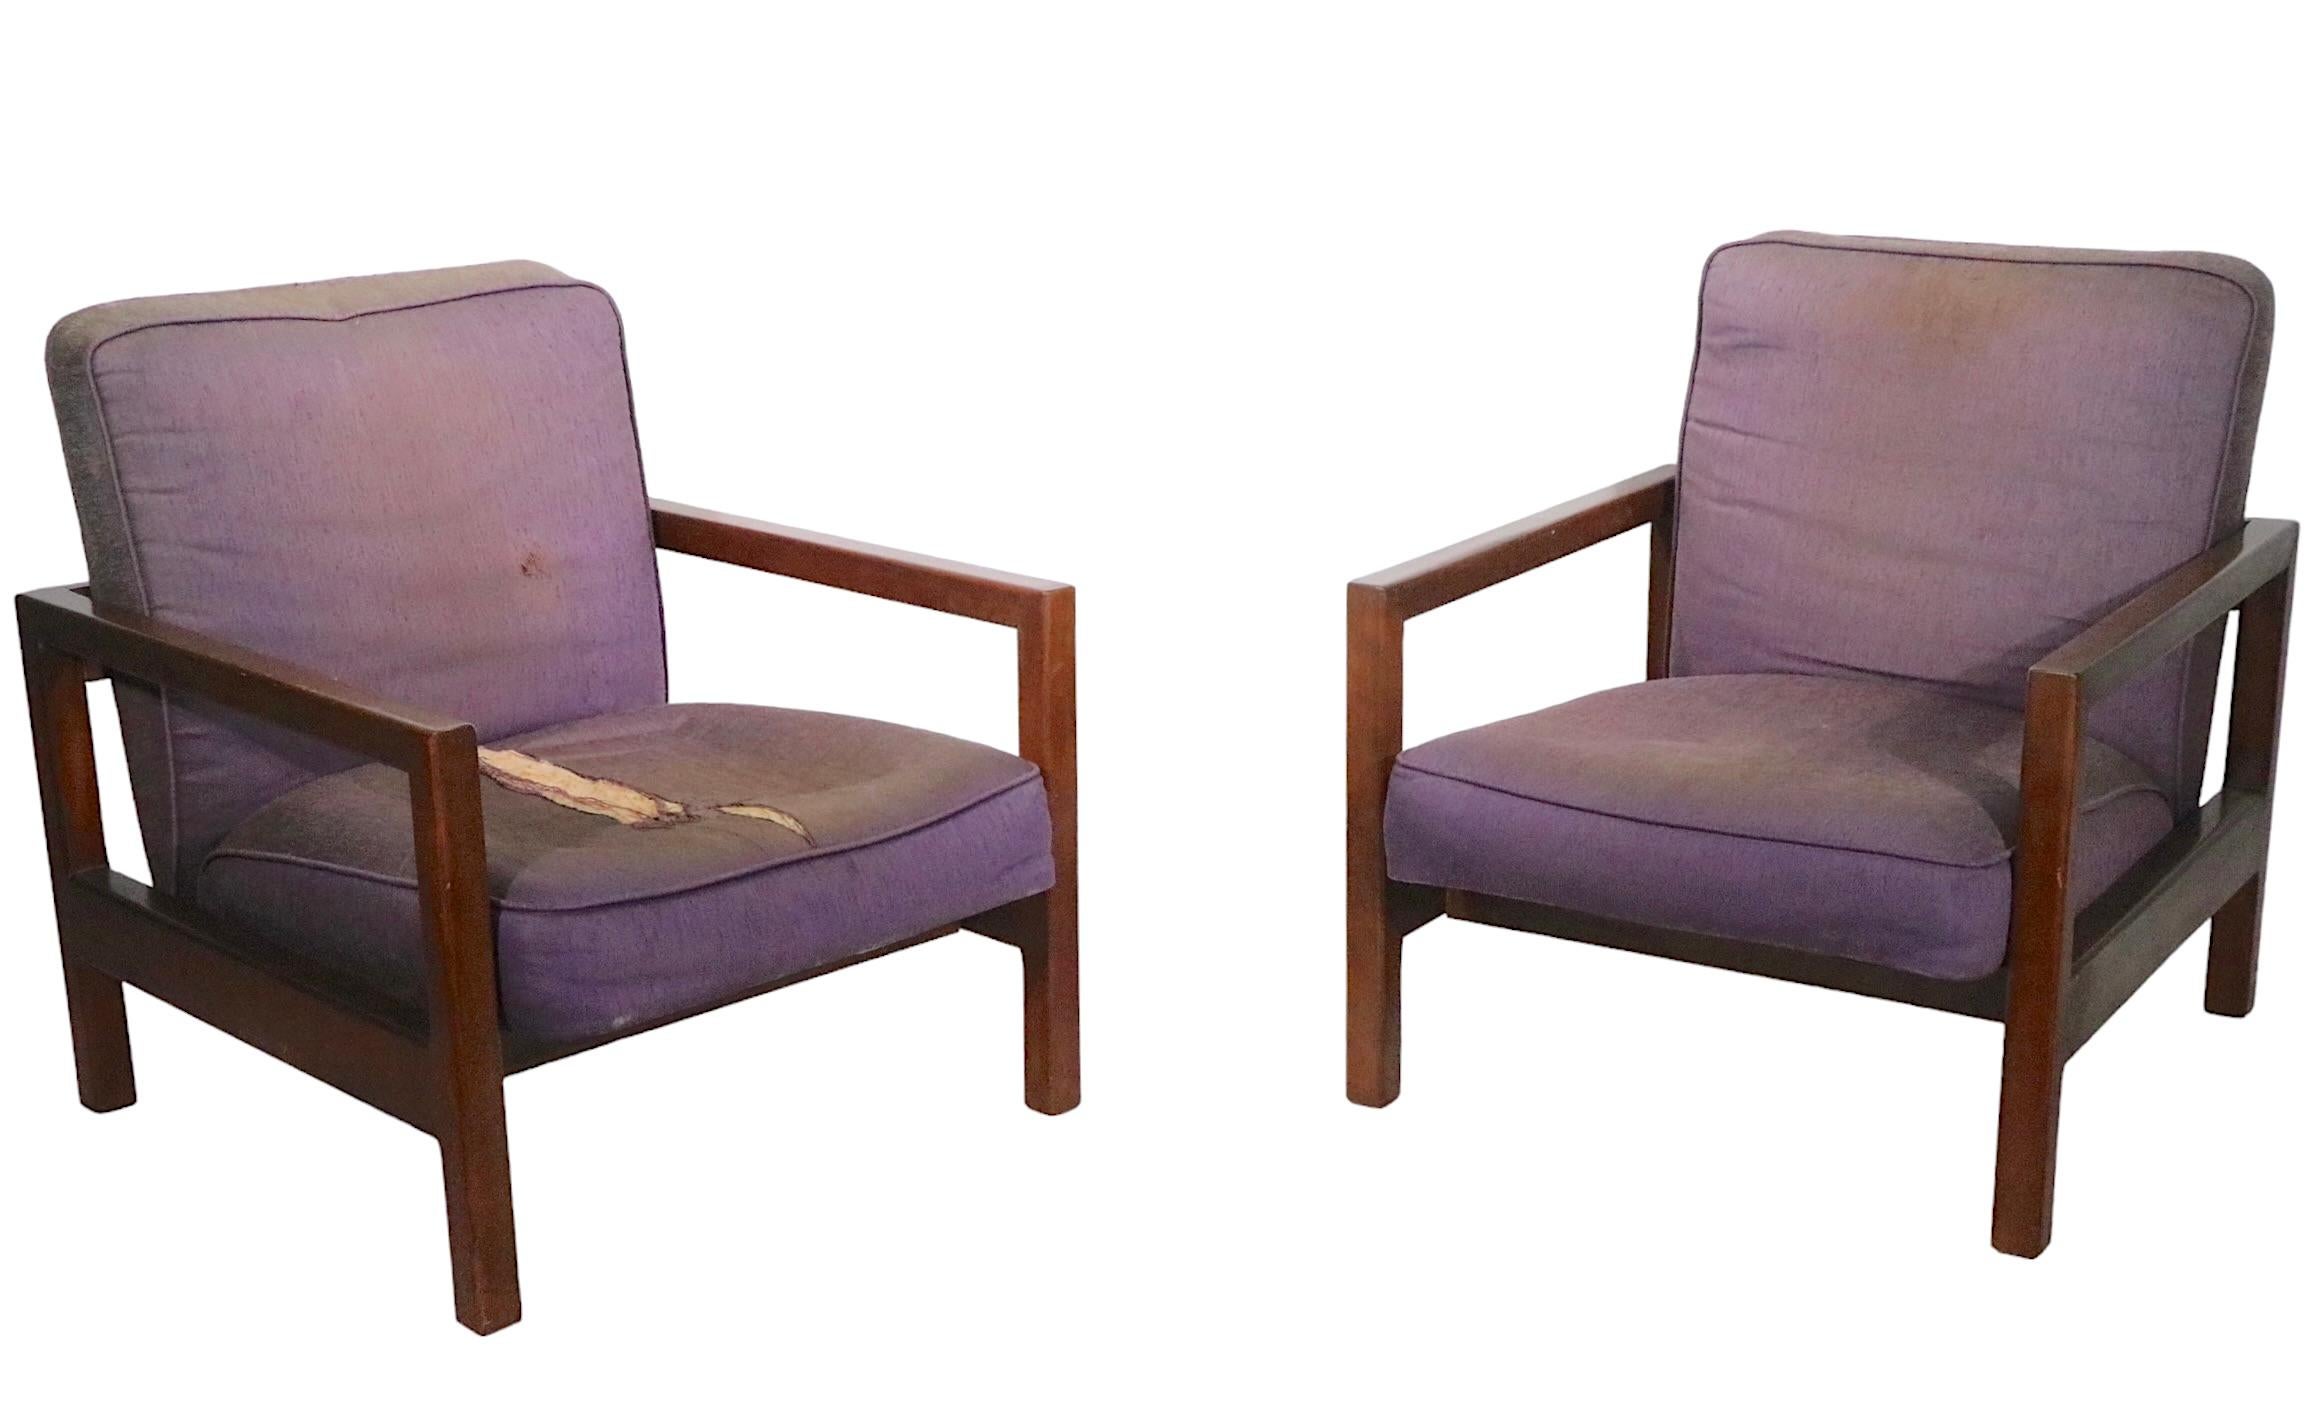 Sophisticated, chic, voguish pair of lounge chairs designed by George Nelson for Herman Miller circa 1950s. The chairs feature solid maple frames with thick upholstered seats and backs, the upholstery is as is and will need to be replaced, please